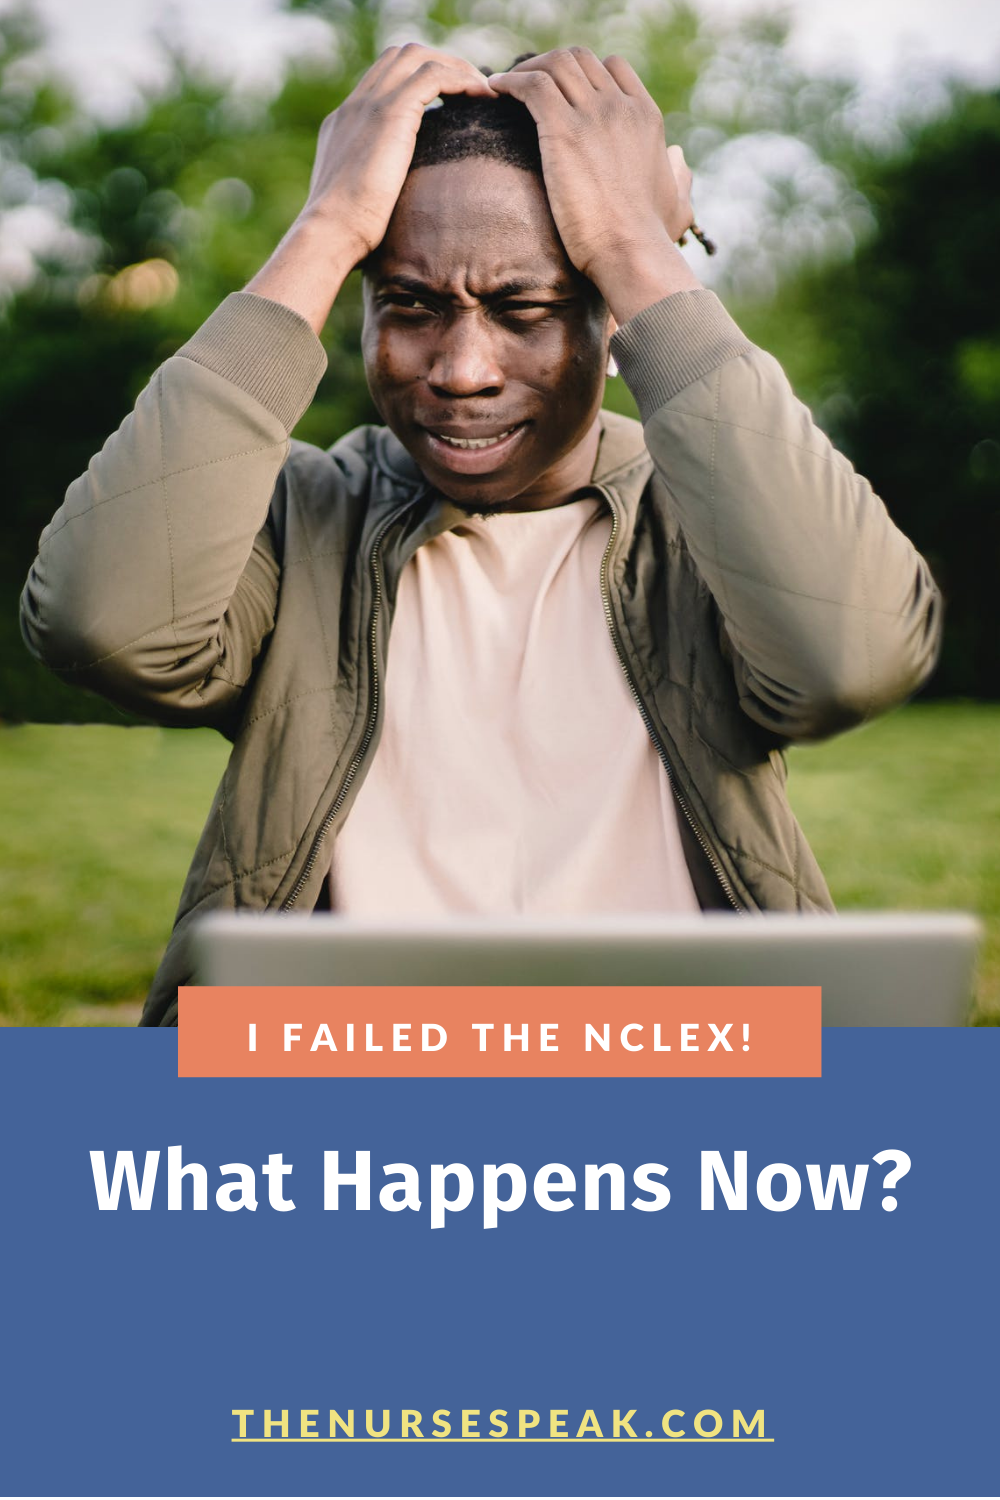 I Failed the NCLEX! What Happens Now?